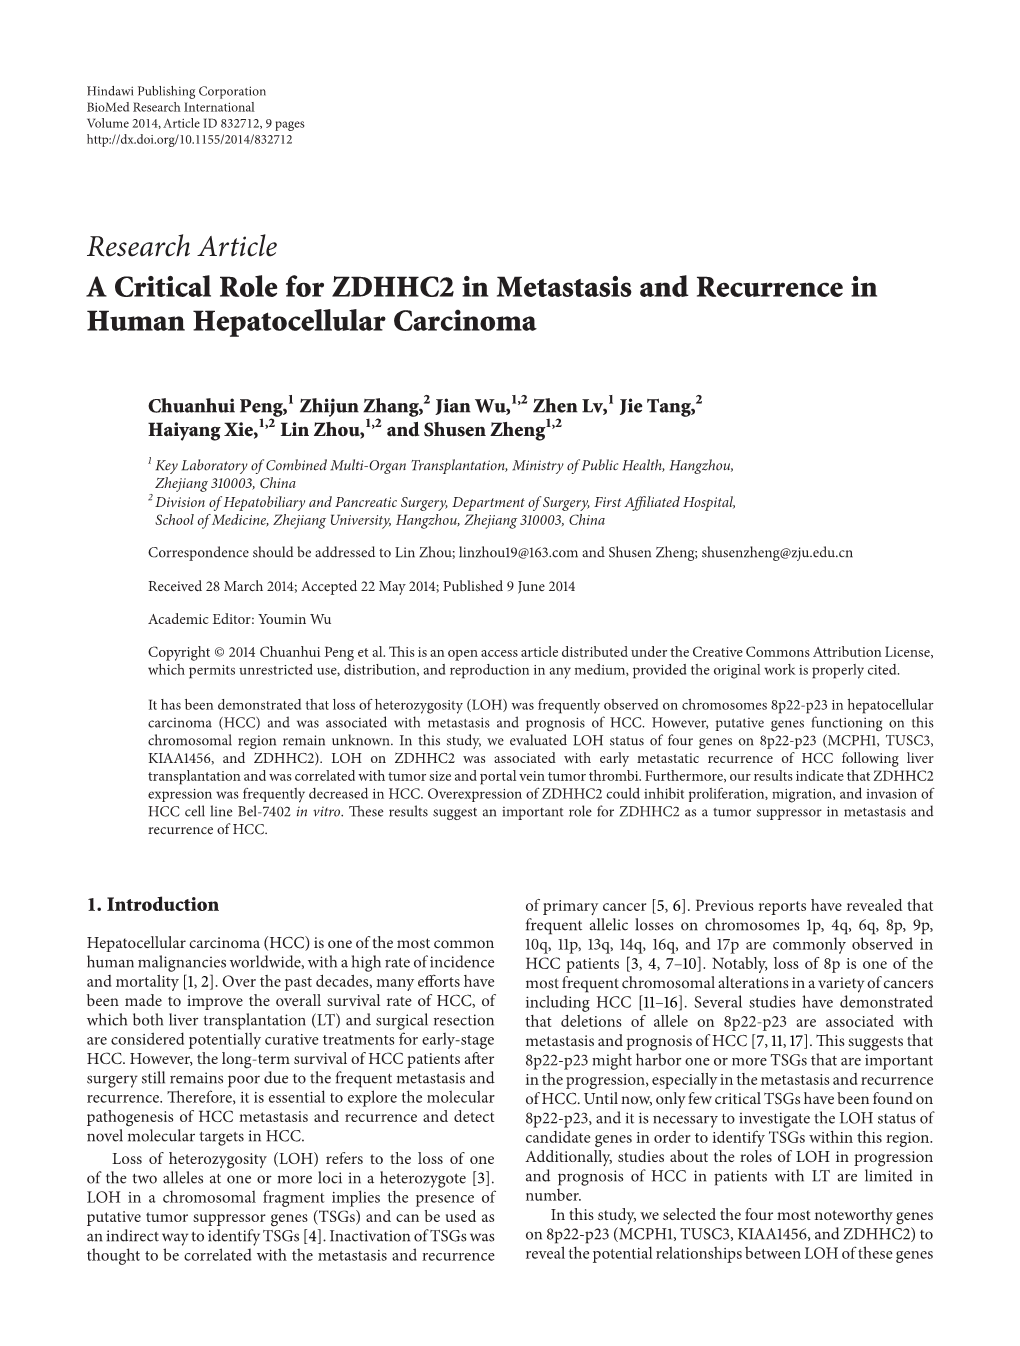 A Critical Role for ZDHHC2 in Metastasis and Recurrence in Human Hepatocellular Carcinoma